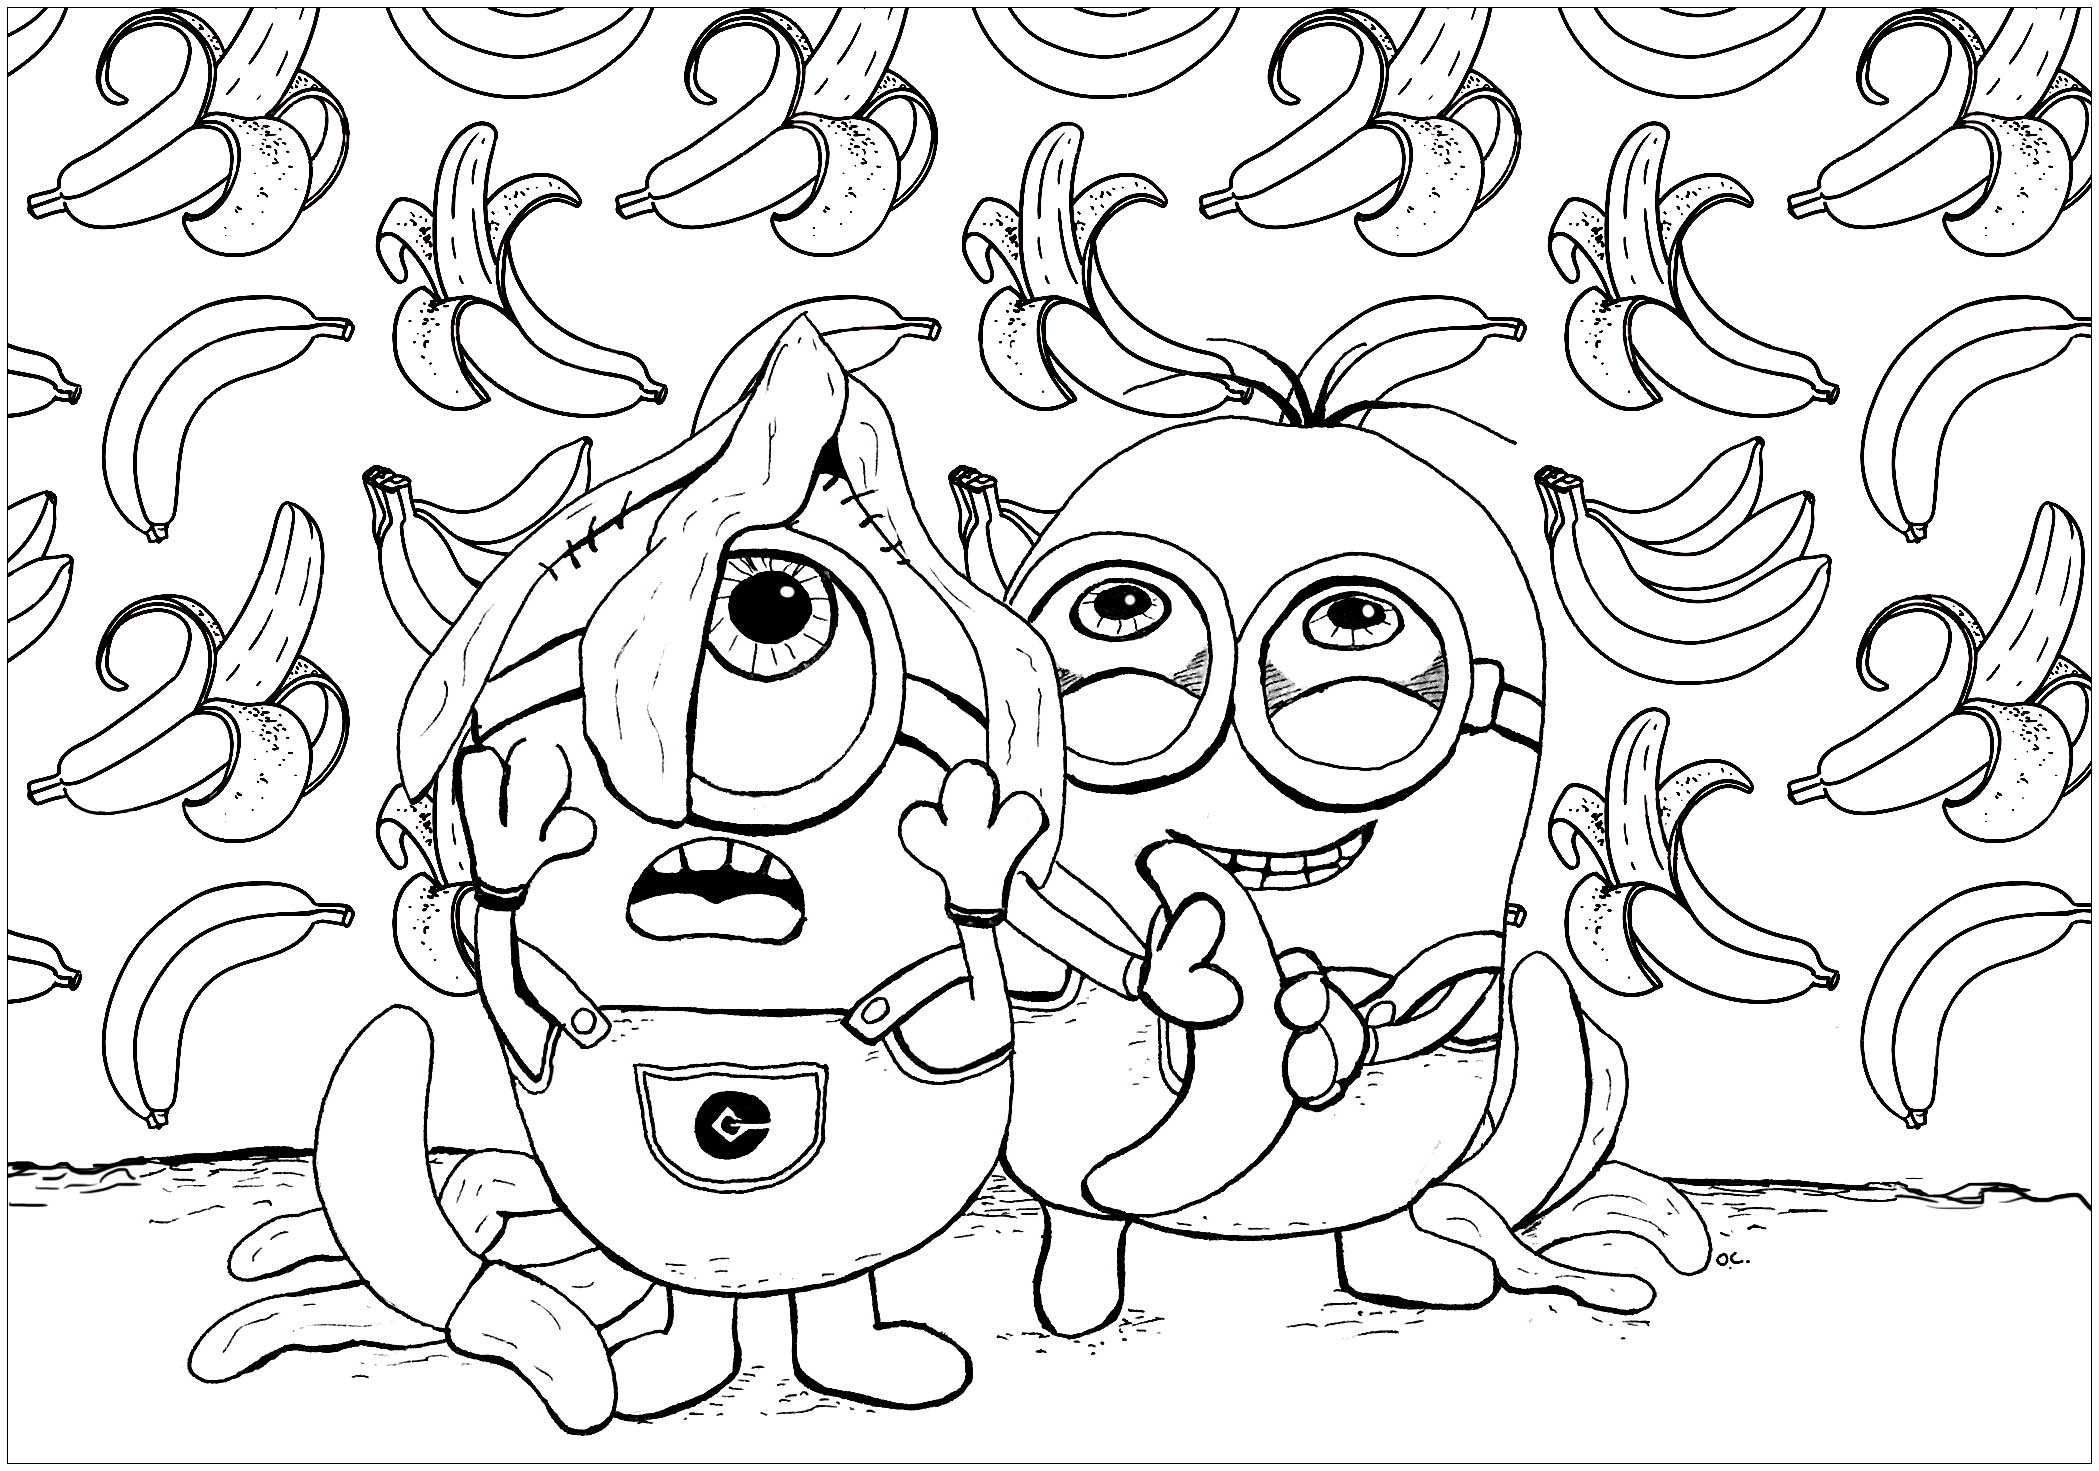 minion-bananas-falling-from-the-sky-minions-kids-coloring-pages